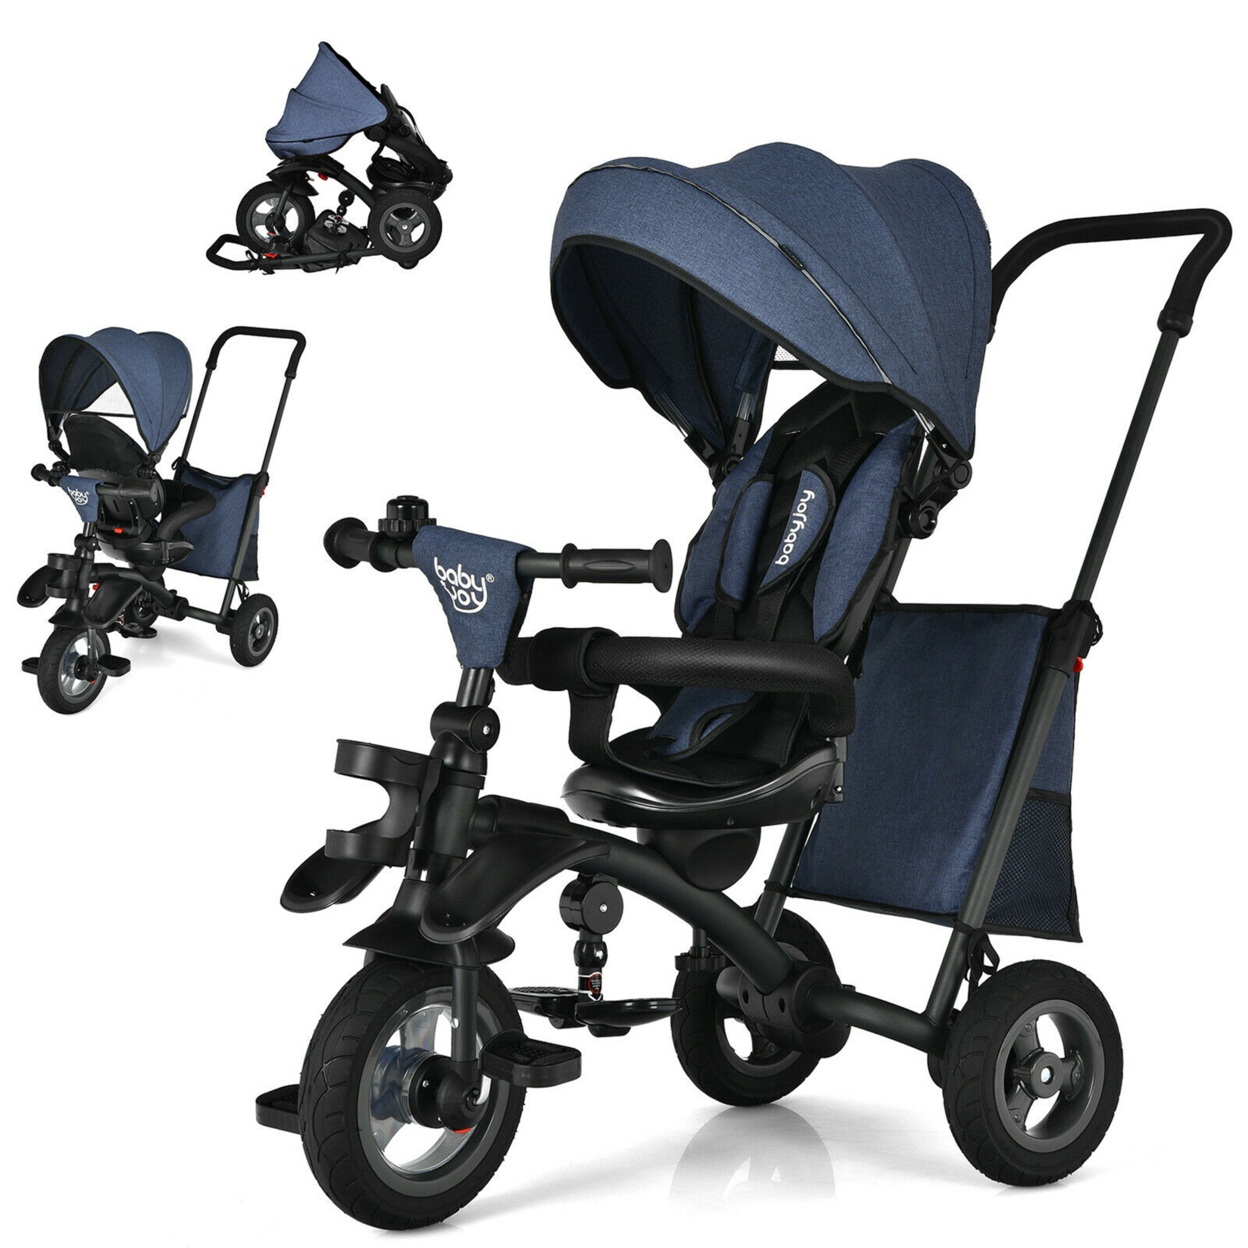 7-In-1 Kids Baby Tricycle Folding Steer Stroller W/ Rotatable Seat - Grey